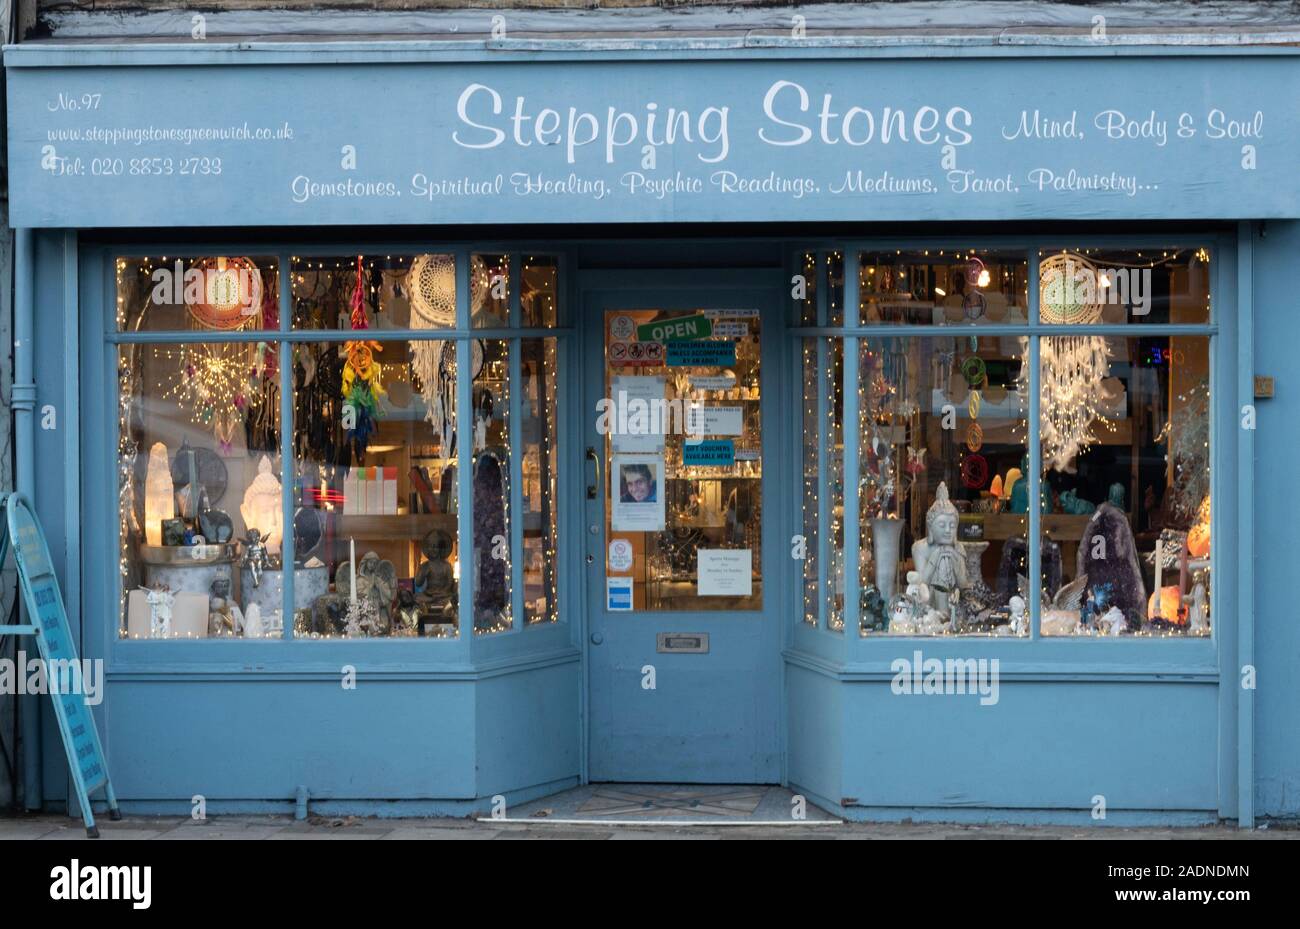 Stepping Stones Greenwich Banque D'Images